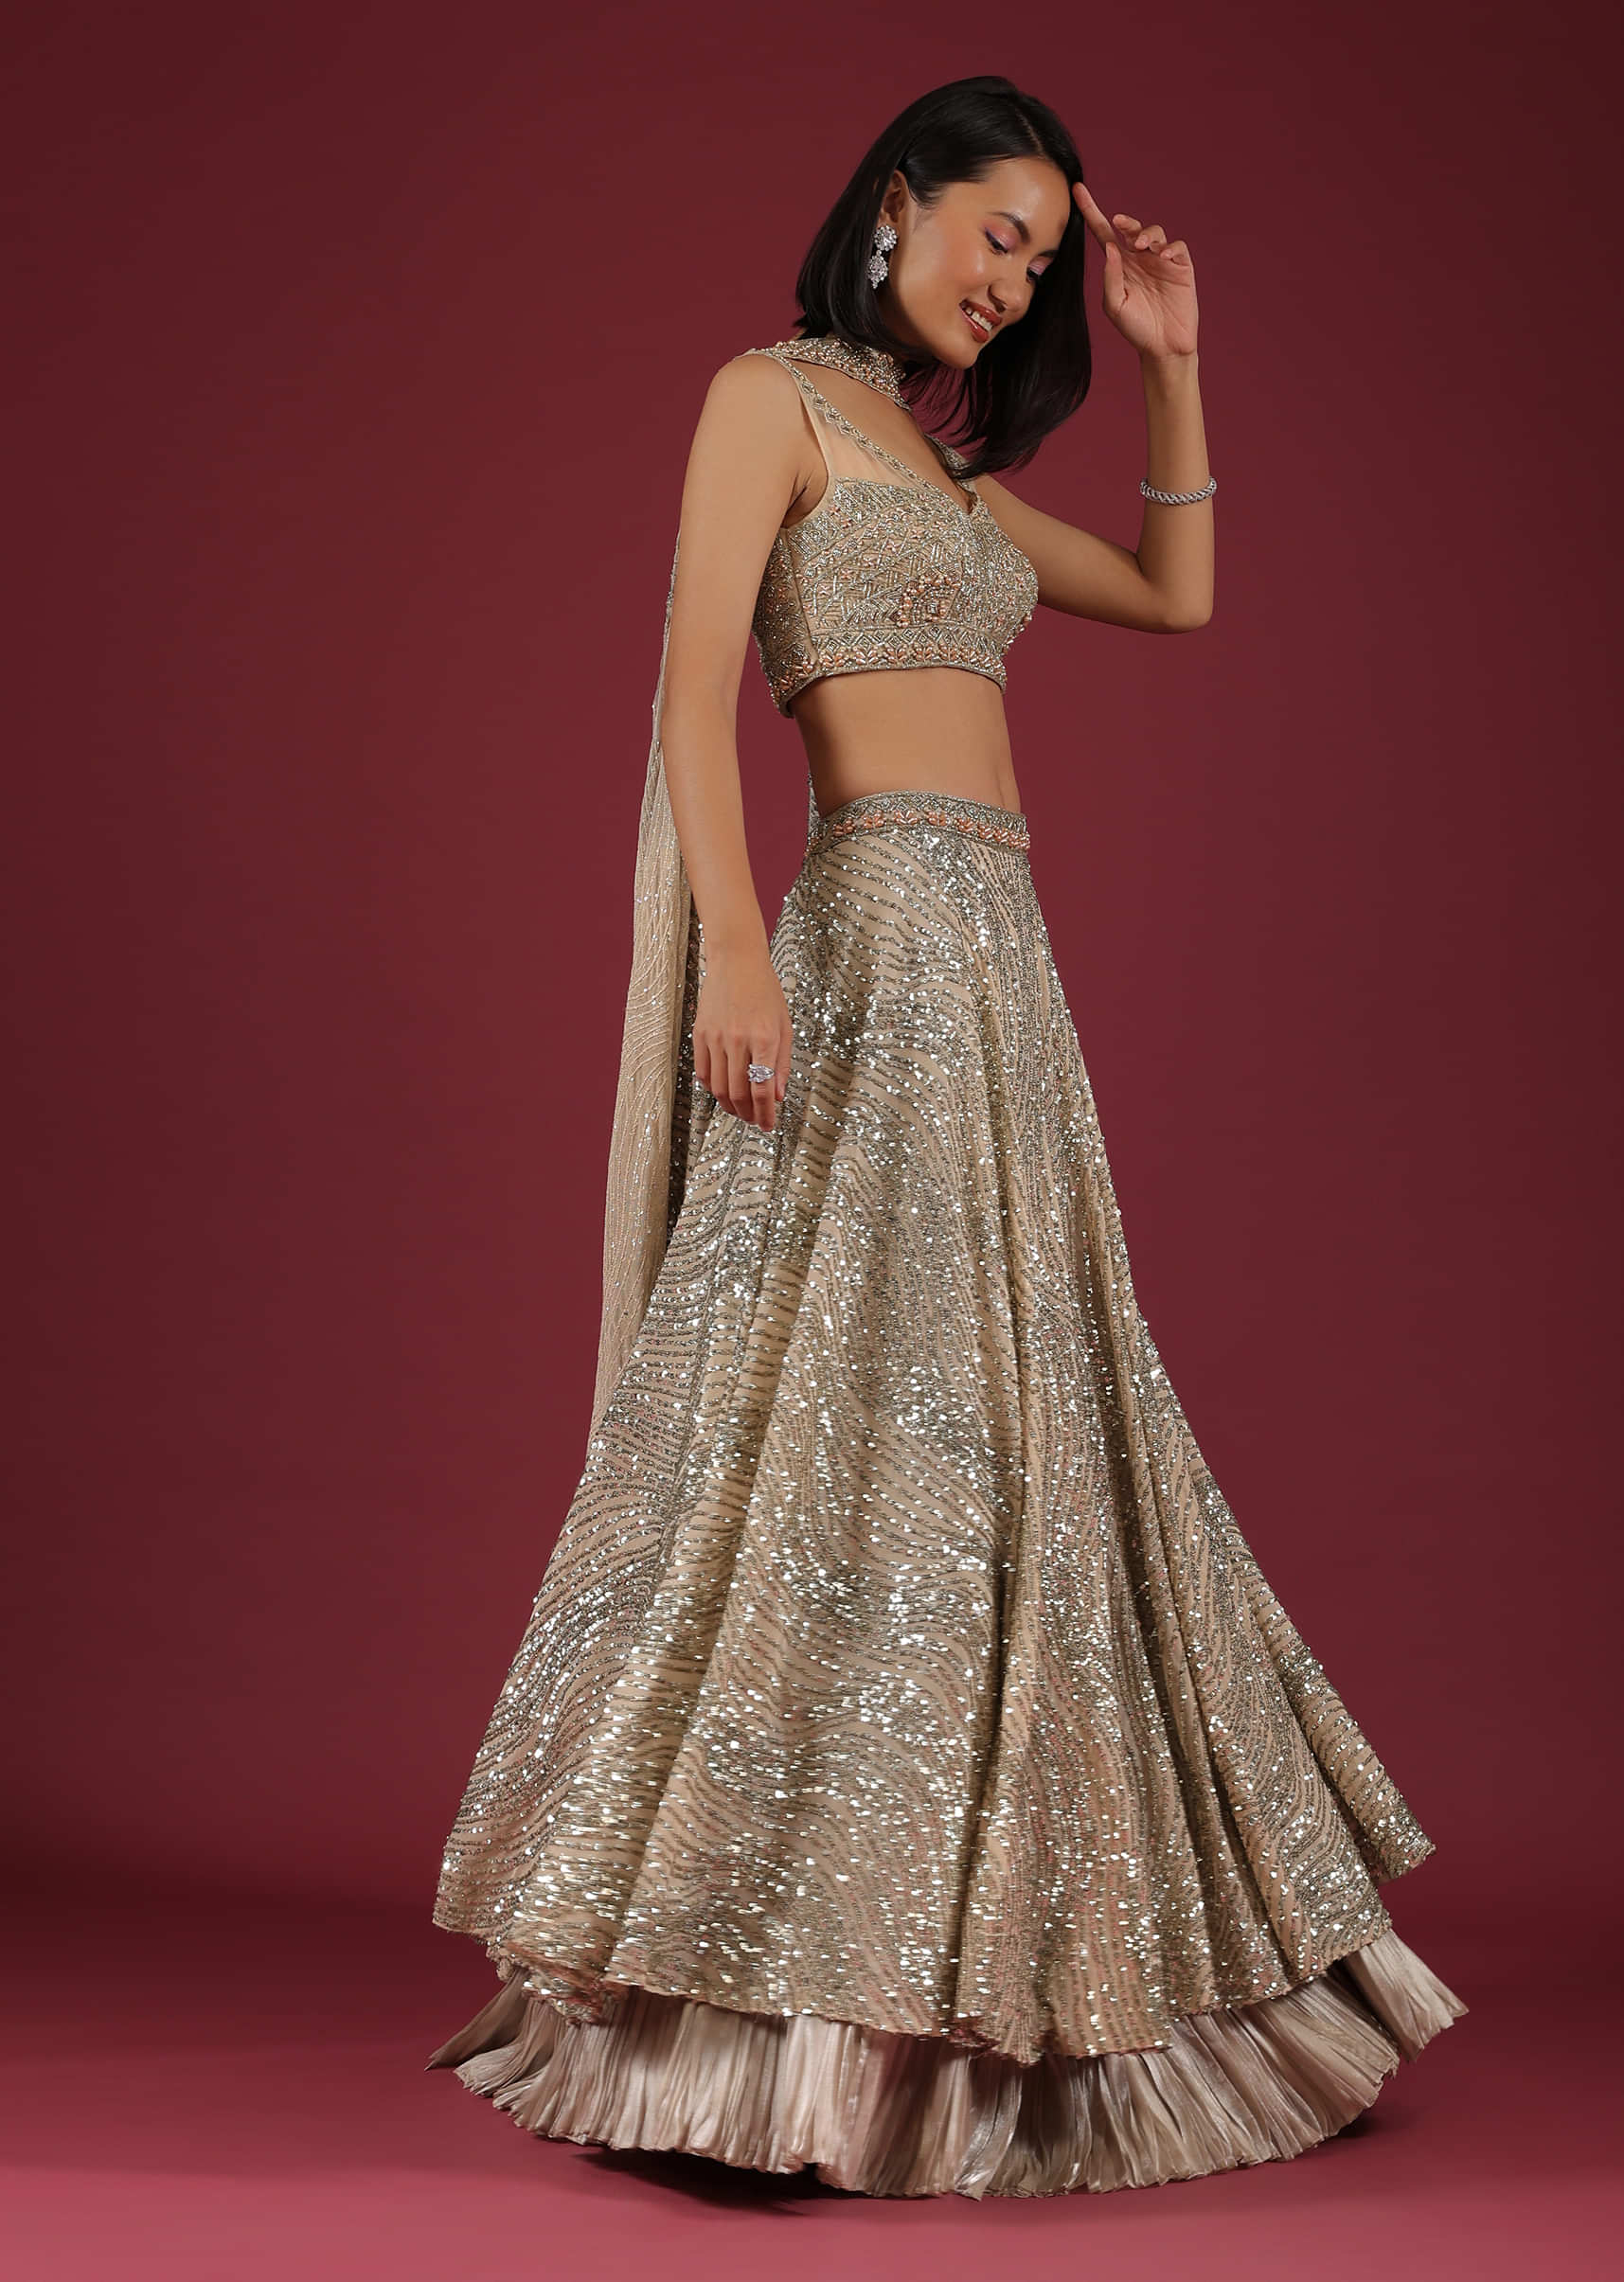 Buy Yellow Crush Lehenga And A Crop Top In Moti Embroidery, Crop Top Comes  In Balloon Sleeves Till The Yoke